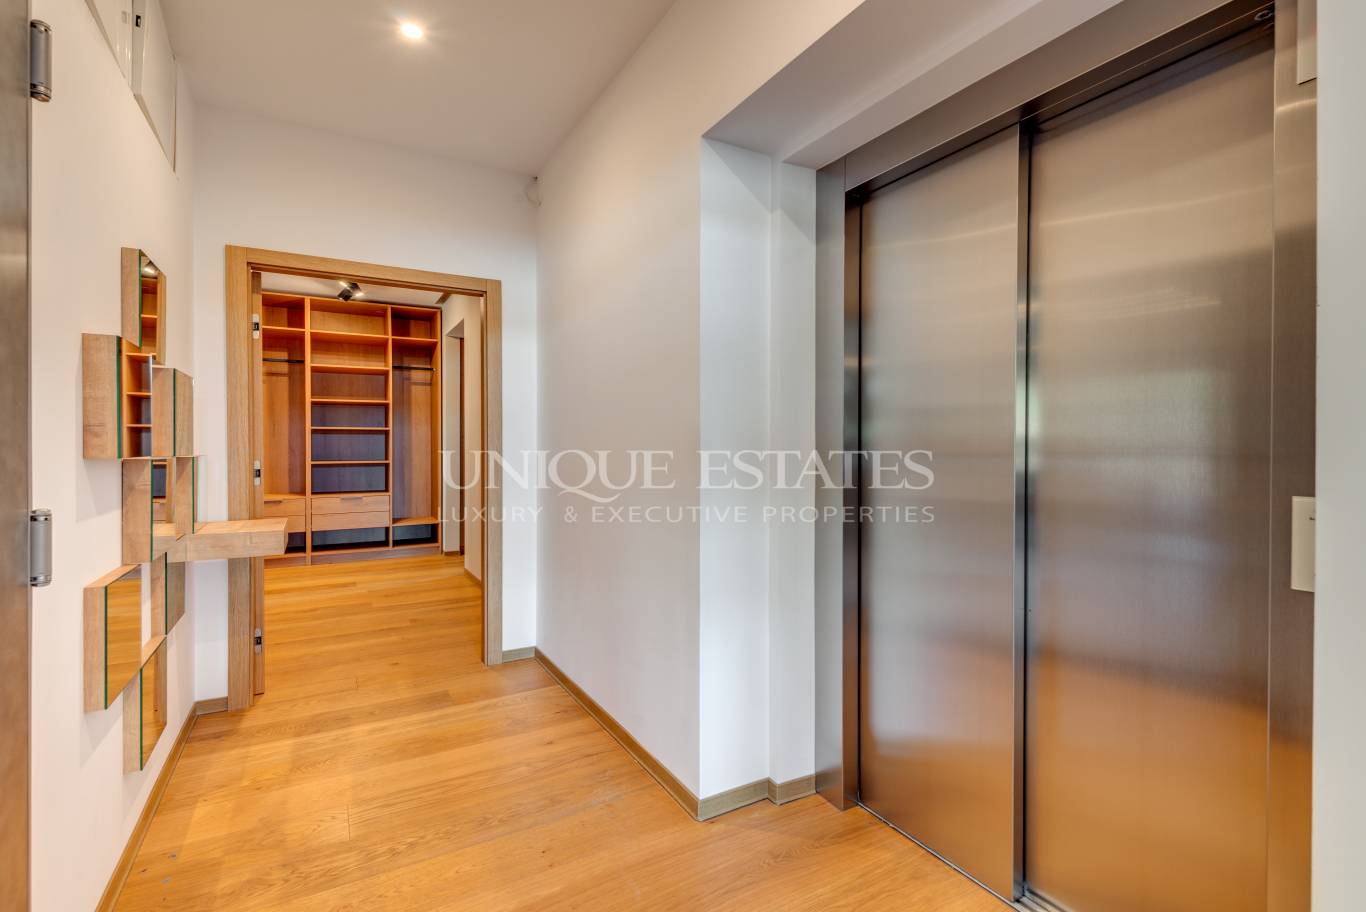 Apartment for sale in Sofia, Pancharevo with listing ID: K14508 - image 6